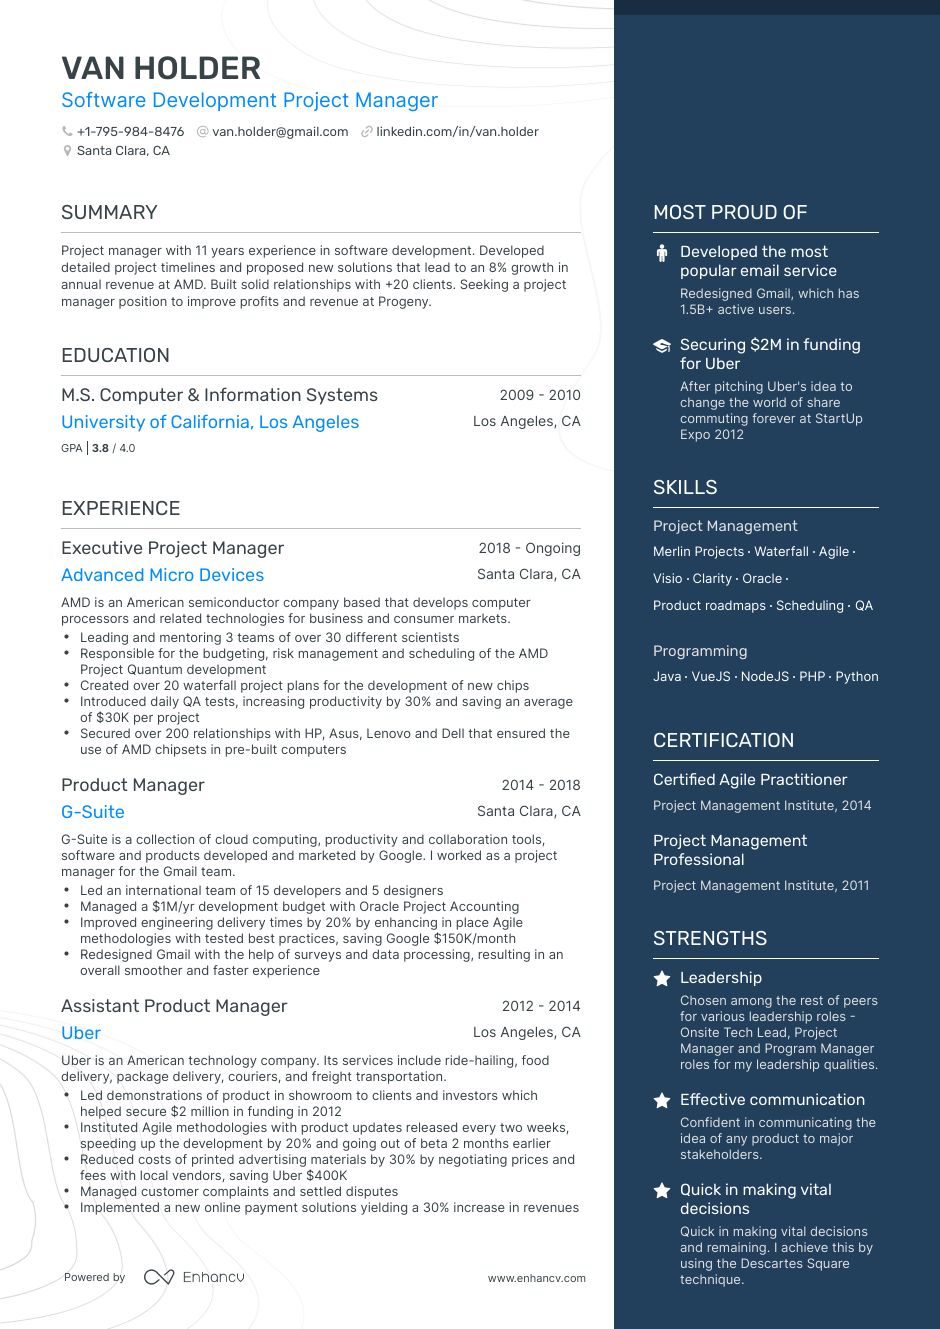 Senior CV template with a solid right column for your skills and achievements, and a wider left column for your experience bullet points